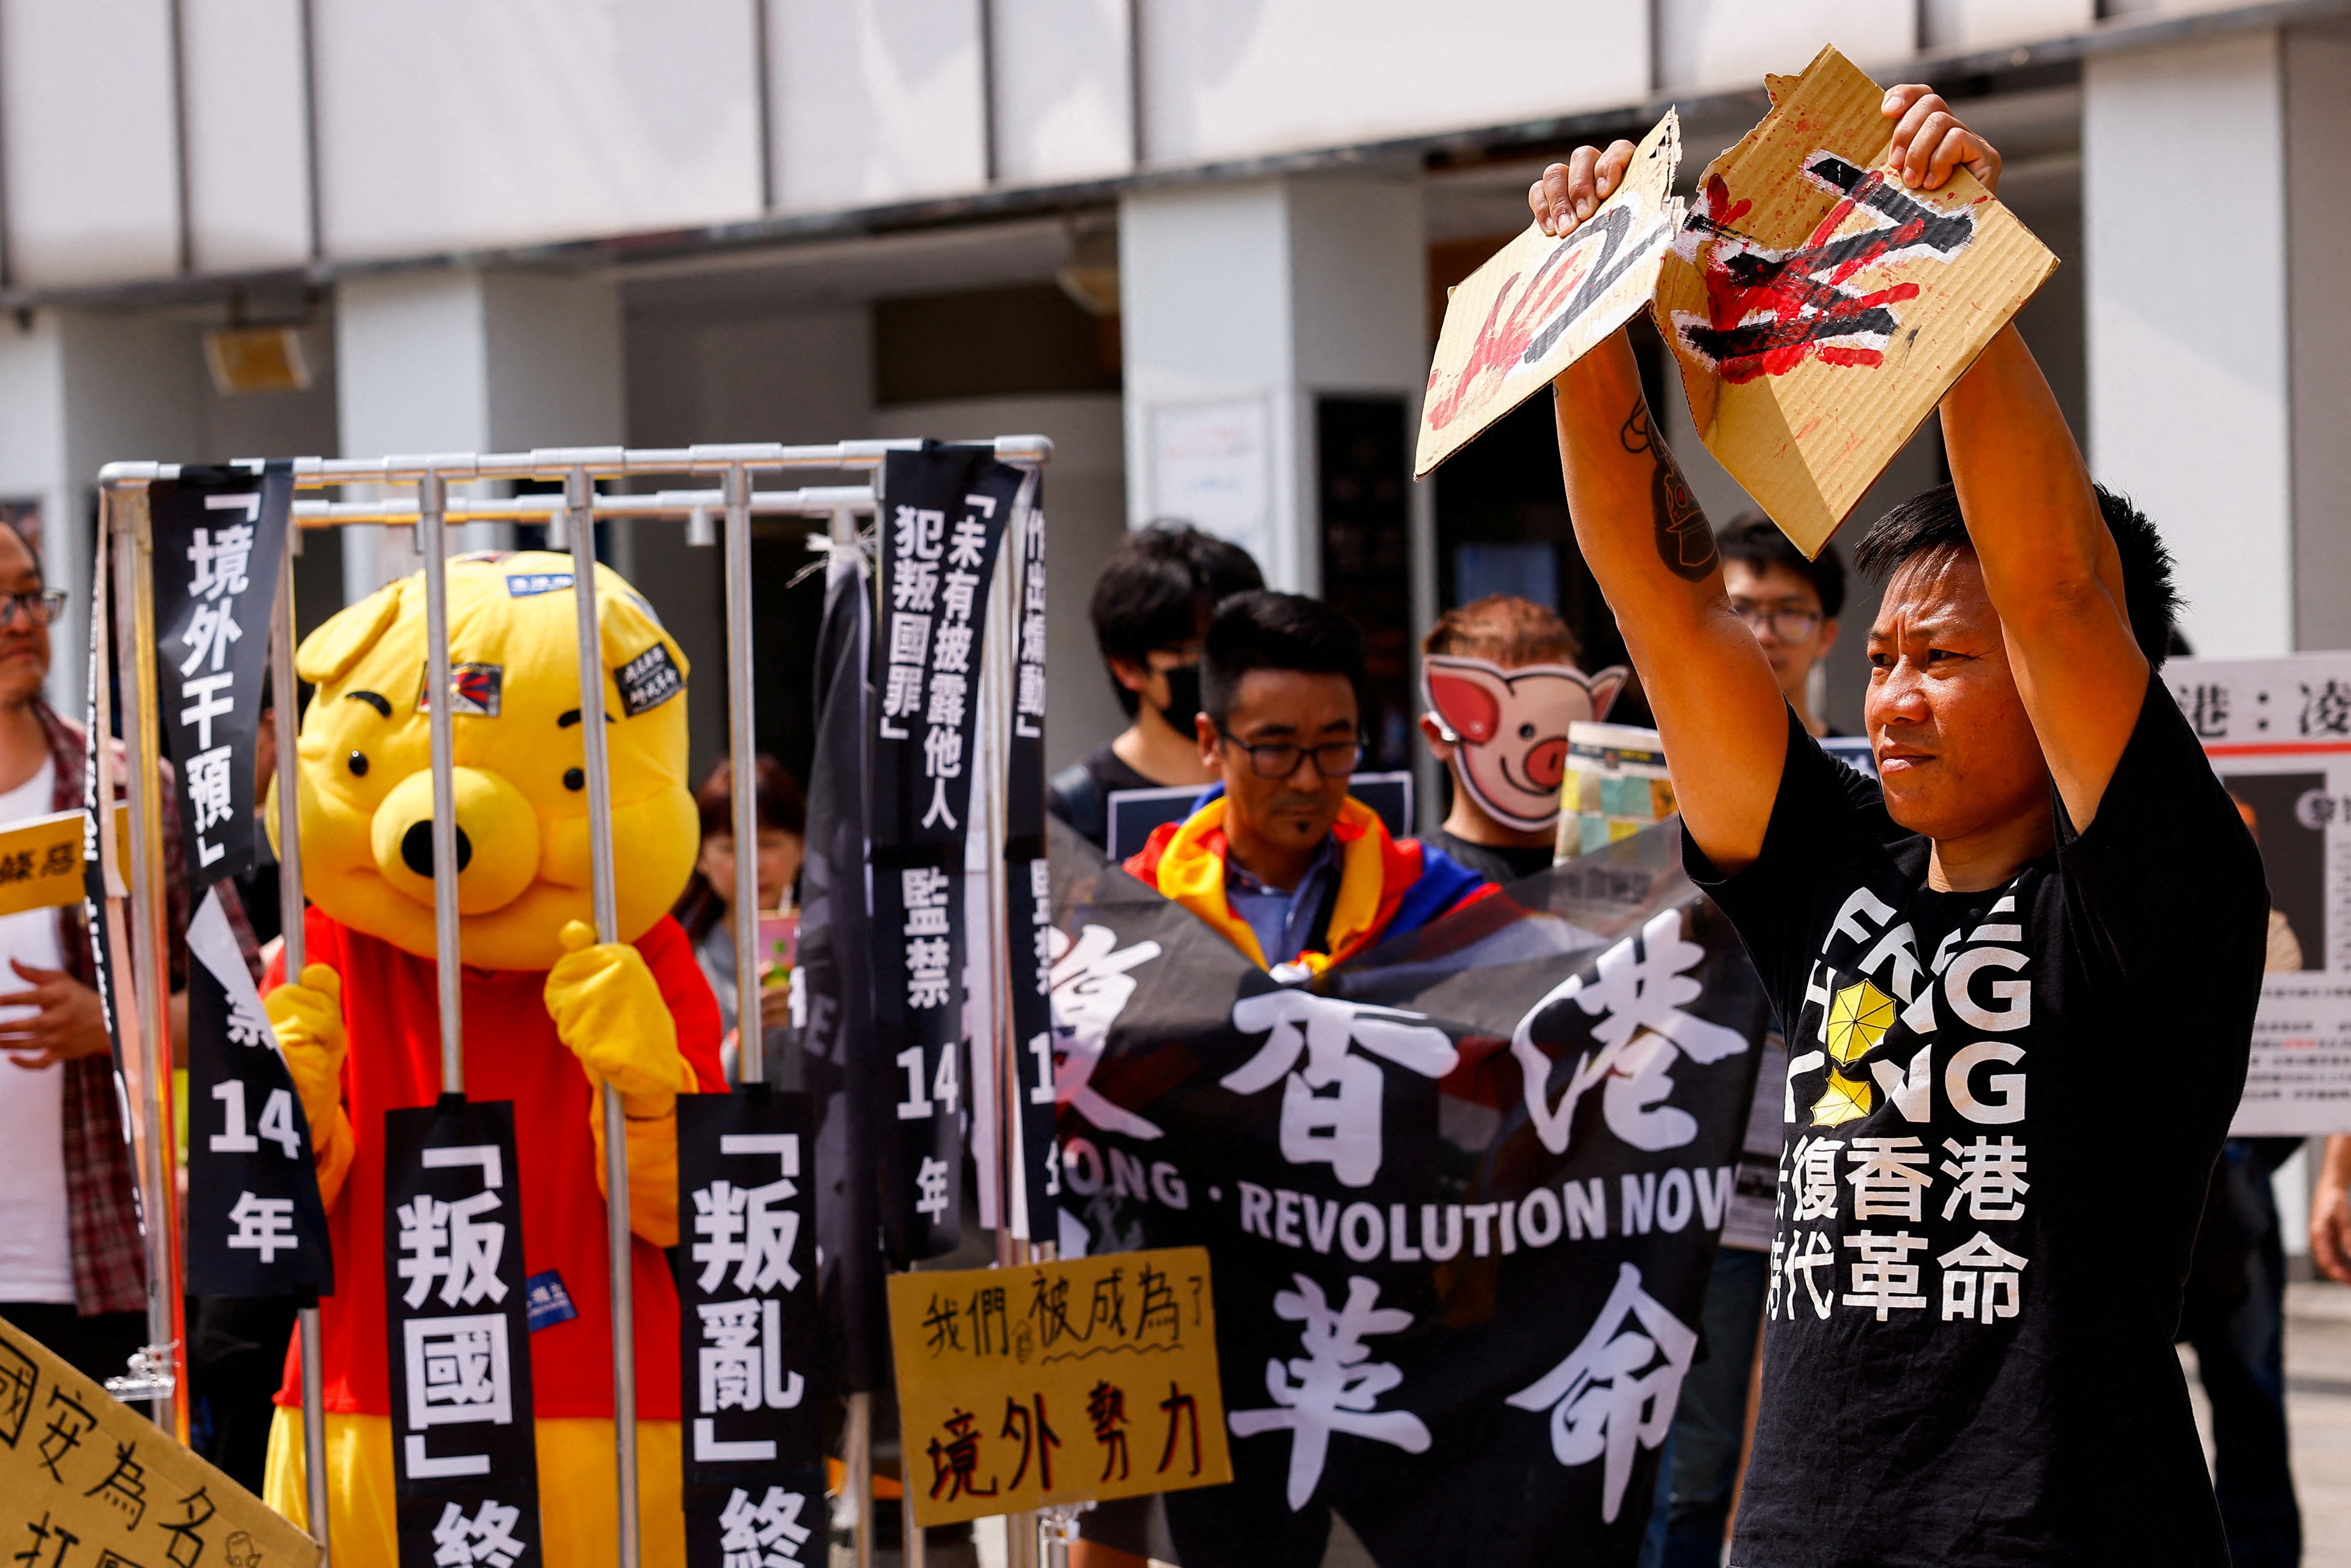 Protest against Hong Kong's new Article 23 national security law in Taipei